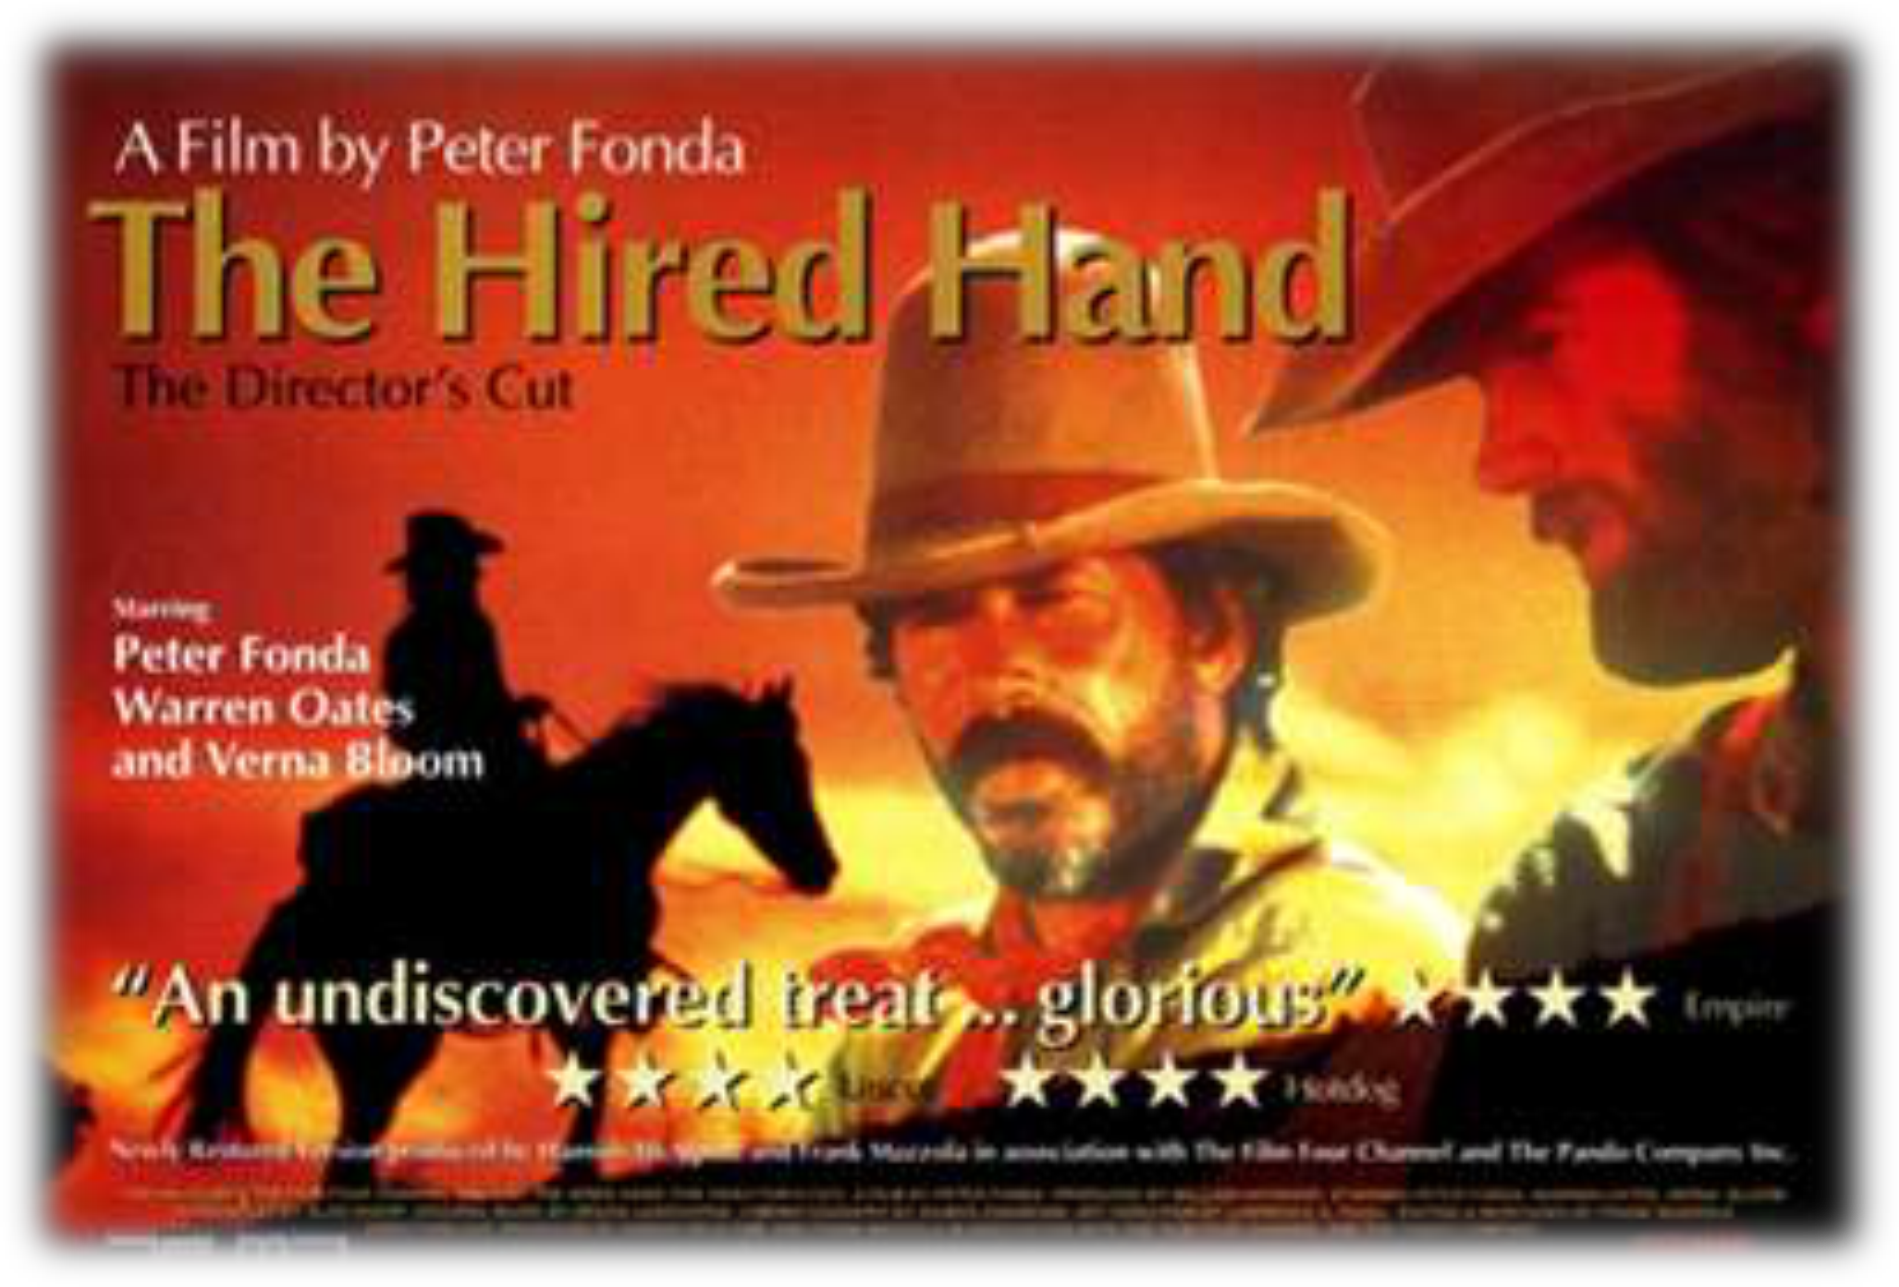 https://myfavoritewesterns.files.wordpress.com/2012/06/the-hired-hand-banner-shot-png-2.png